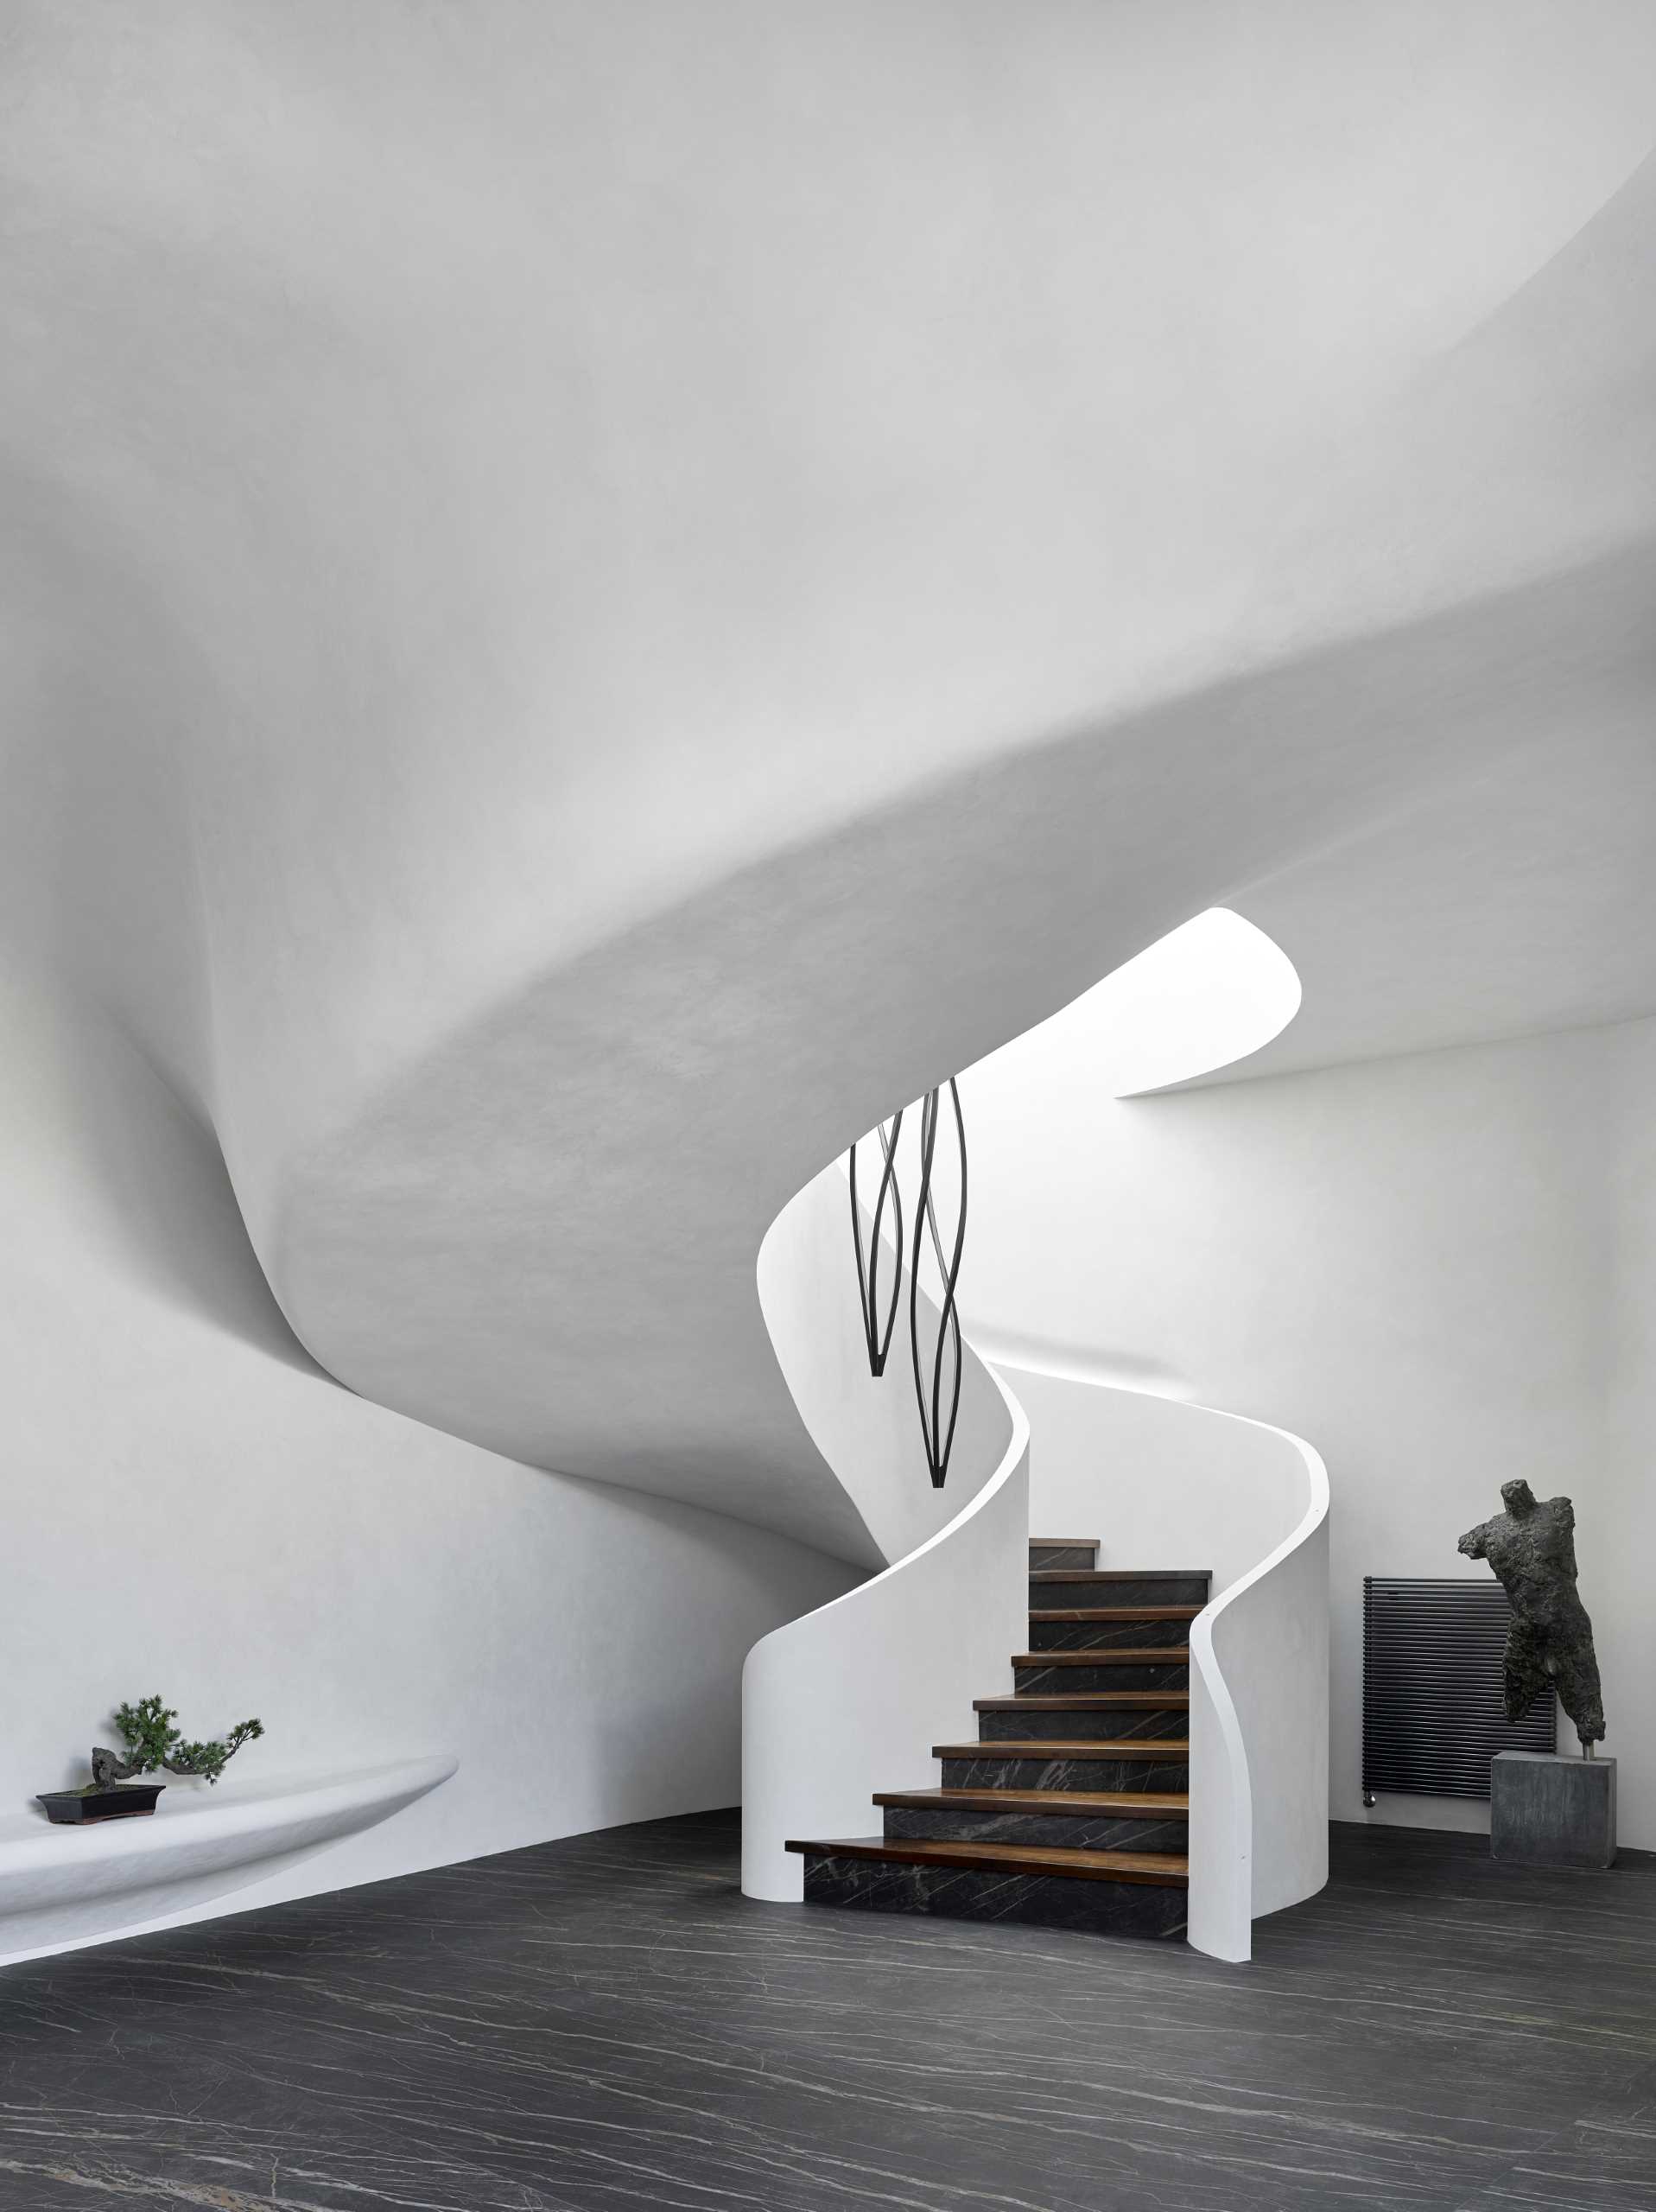 Spiral stairs built into the design of this modern home add an interior sculptural element, while the walls contrast the dark floor.